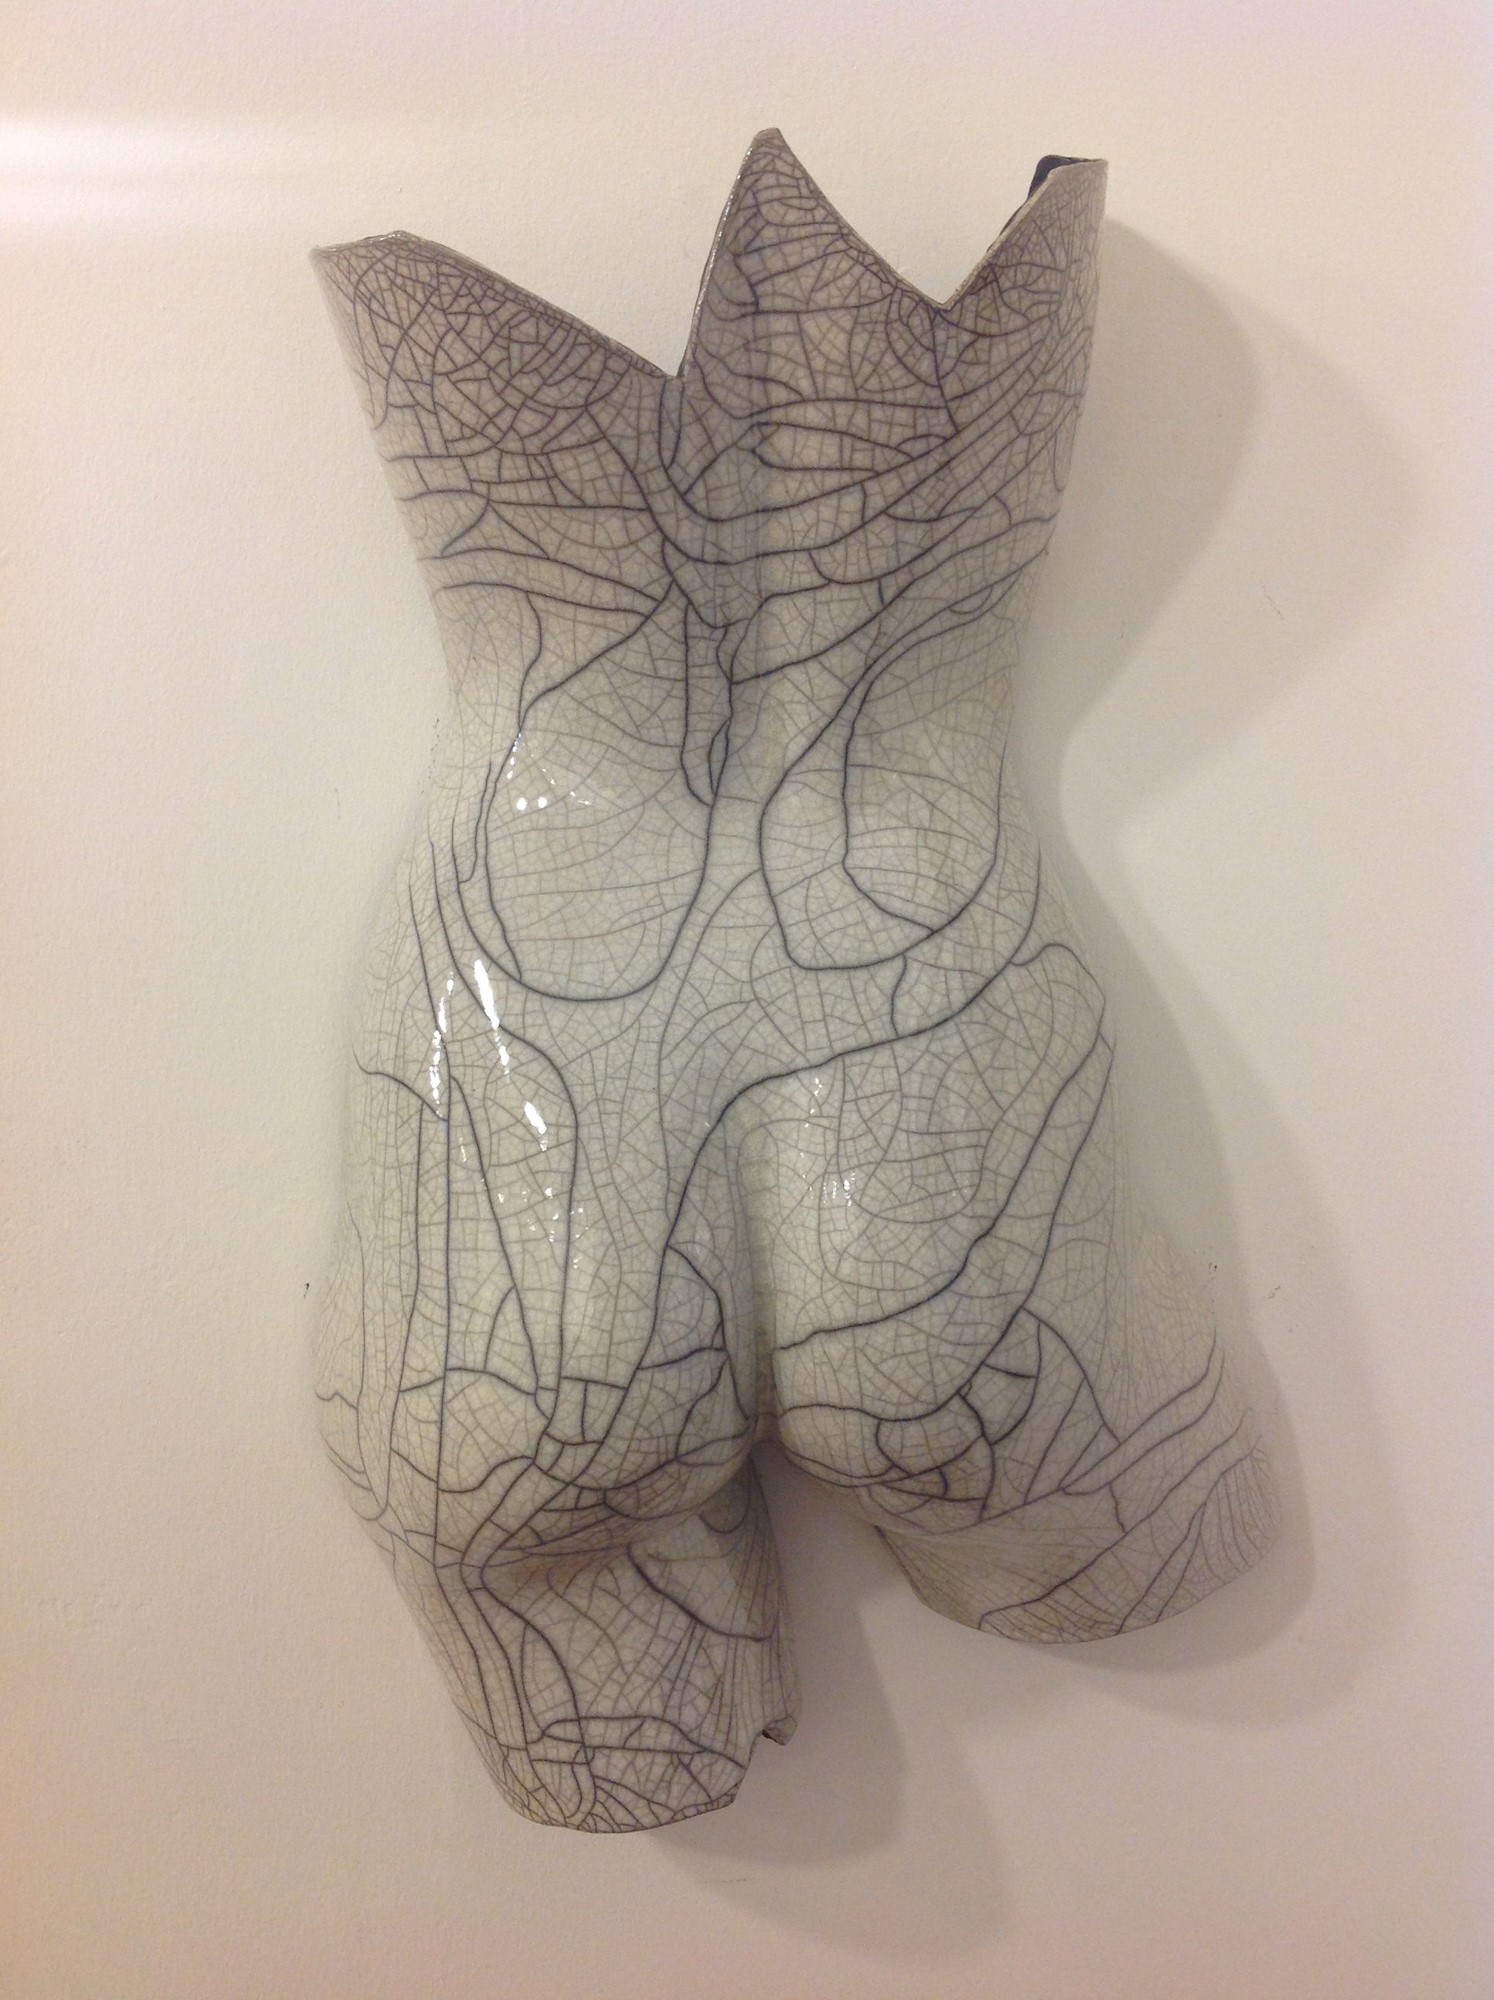 'White Crackle Bum' by artist Julian Smith